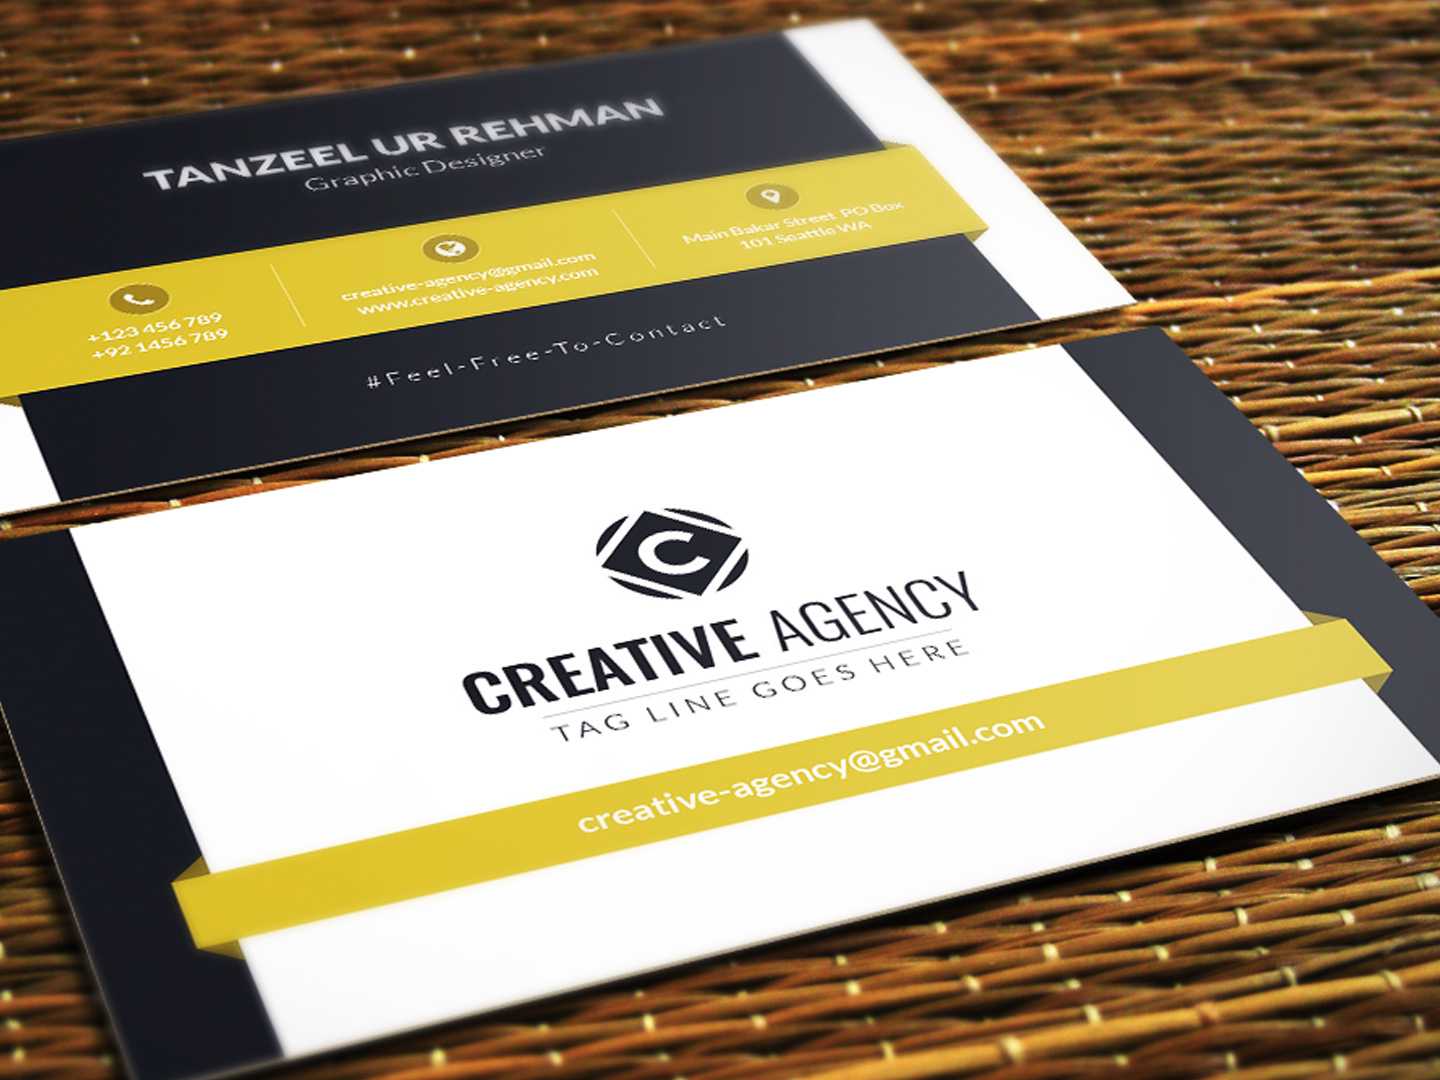 Business Cards Template – Free Downloadtanzeel Ur Rehman With Download Visiting Card Templates